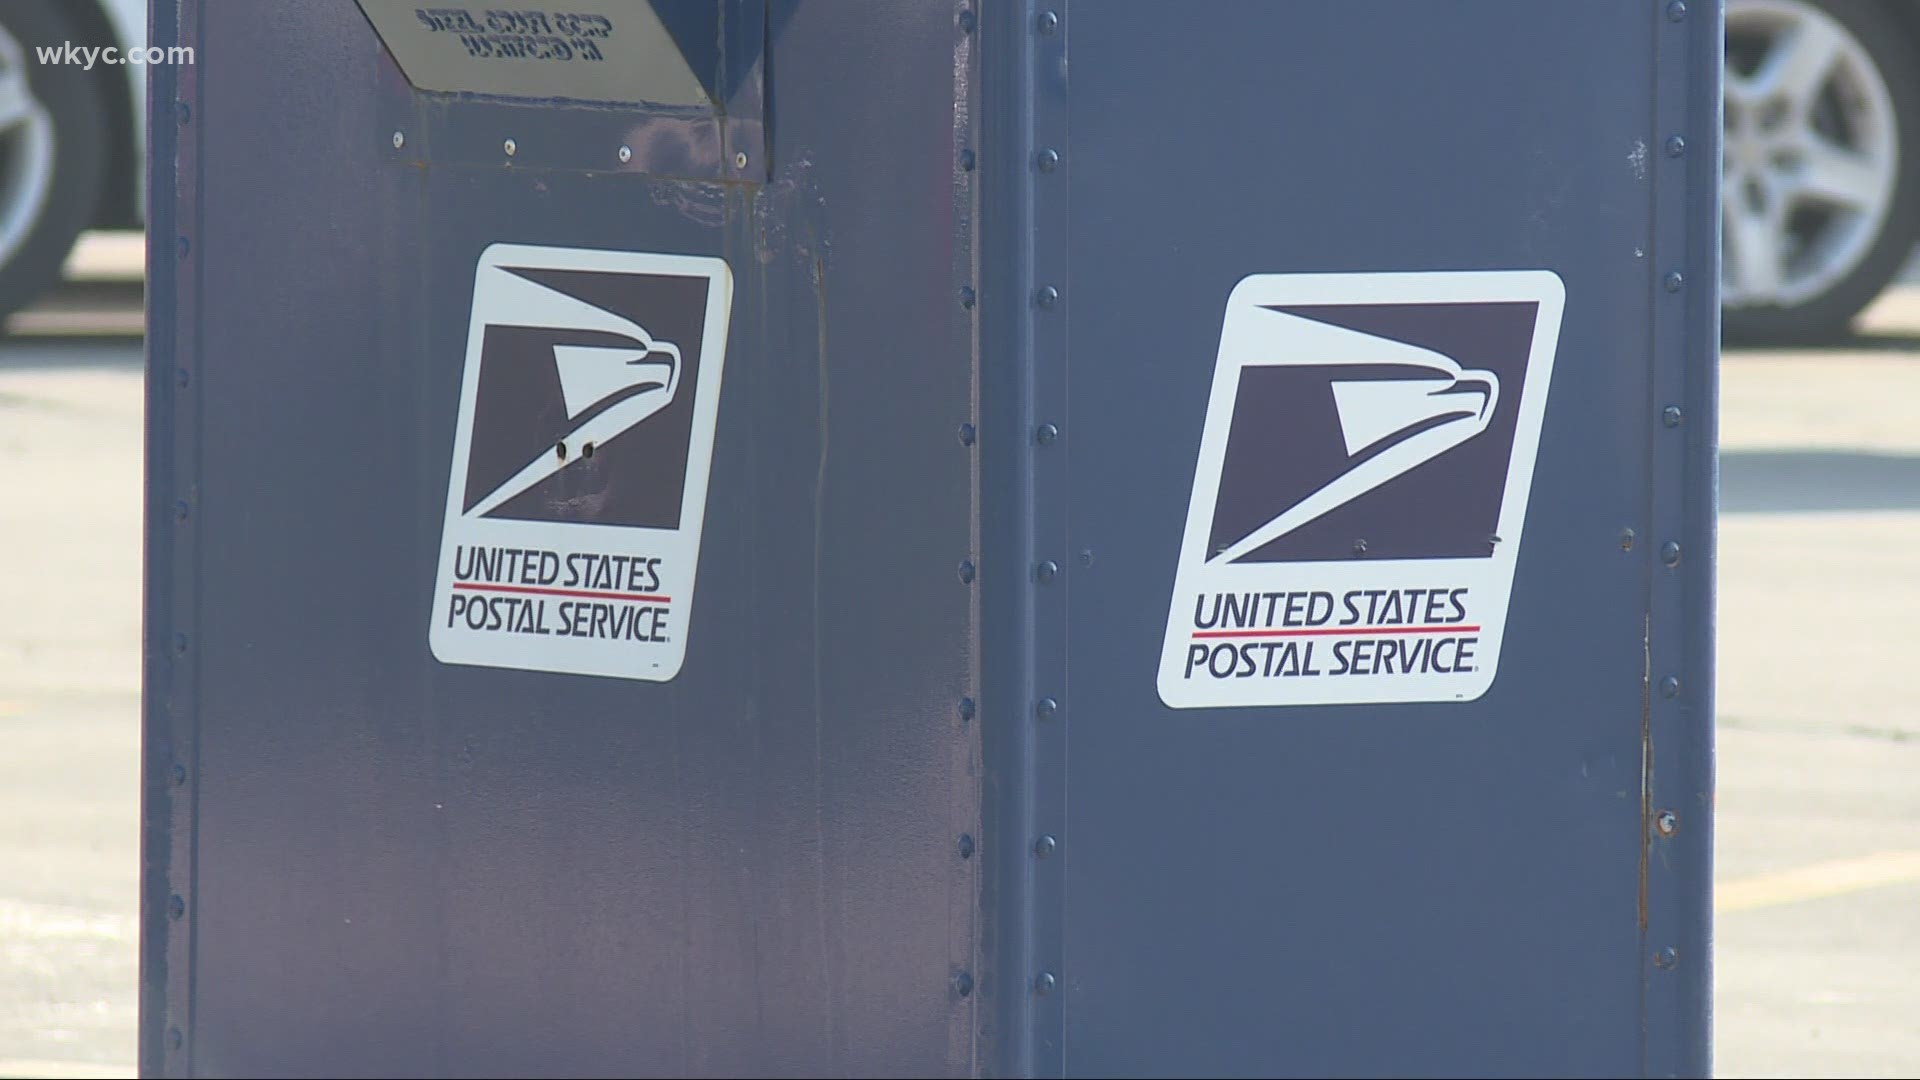 It's not just Christmas presents arriving late, but medications too. How the postal service hopes to get the mail moving.